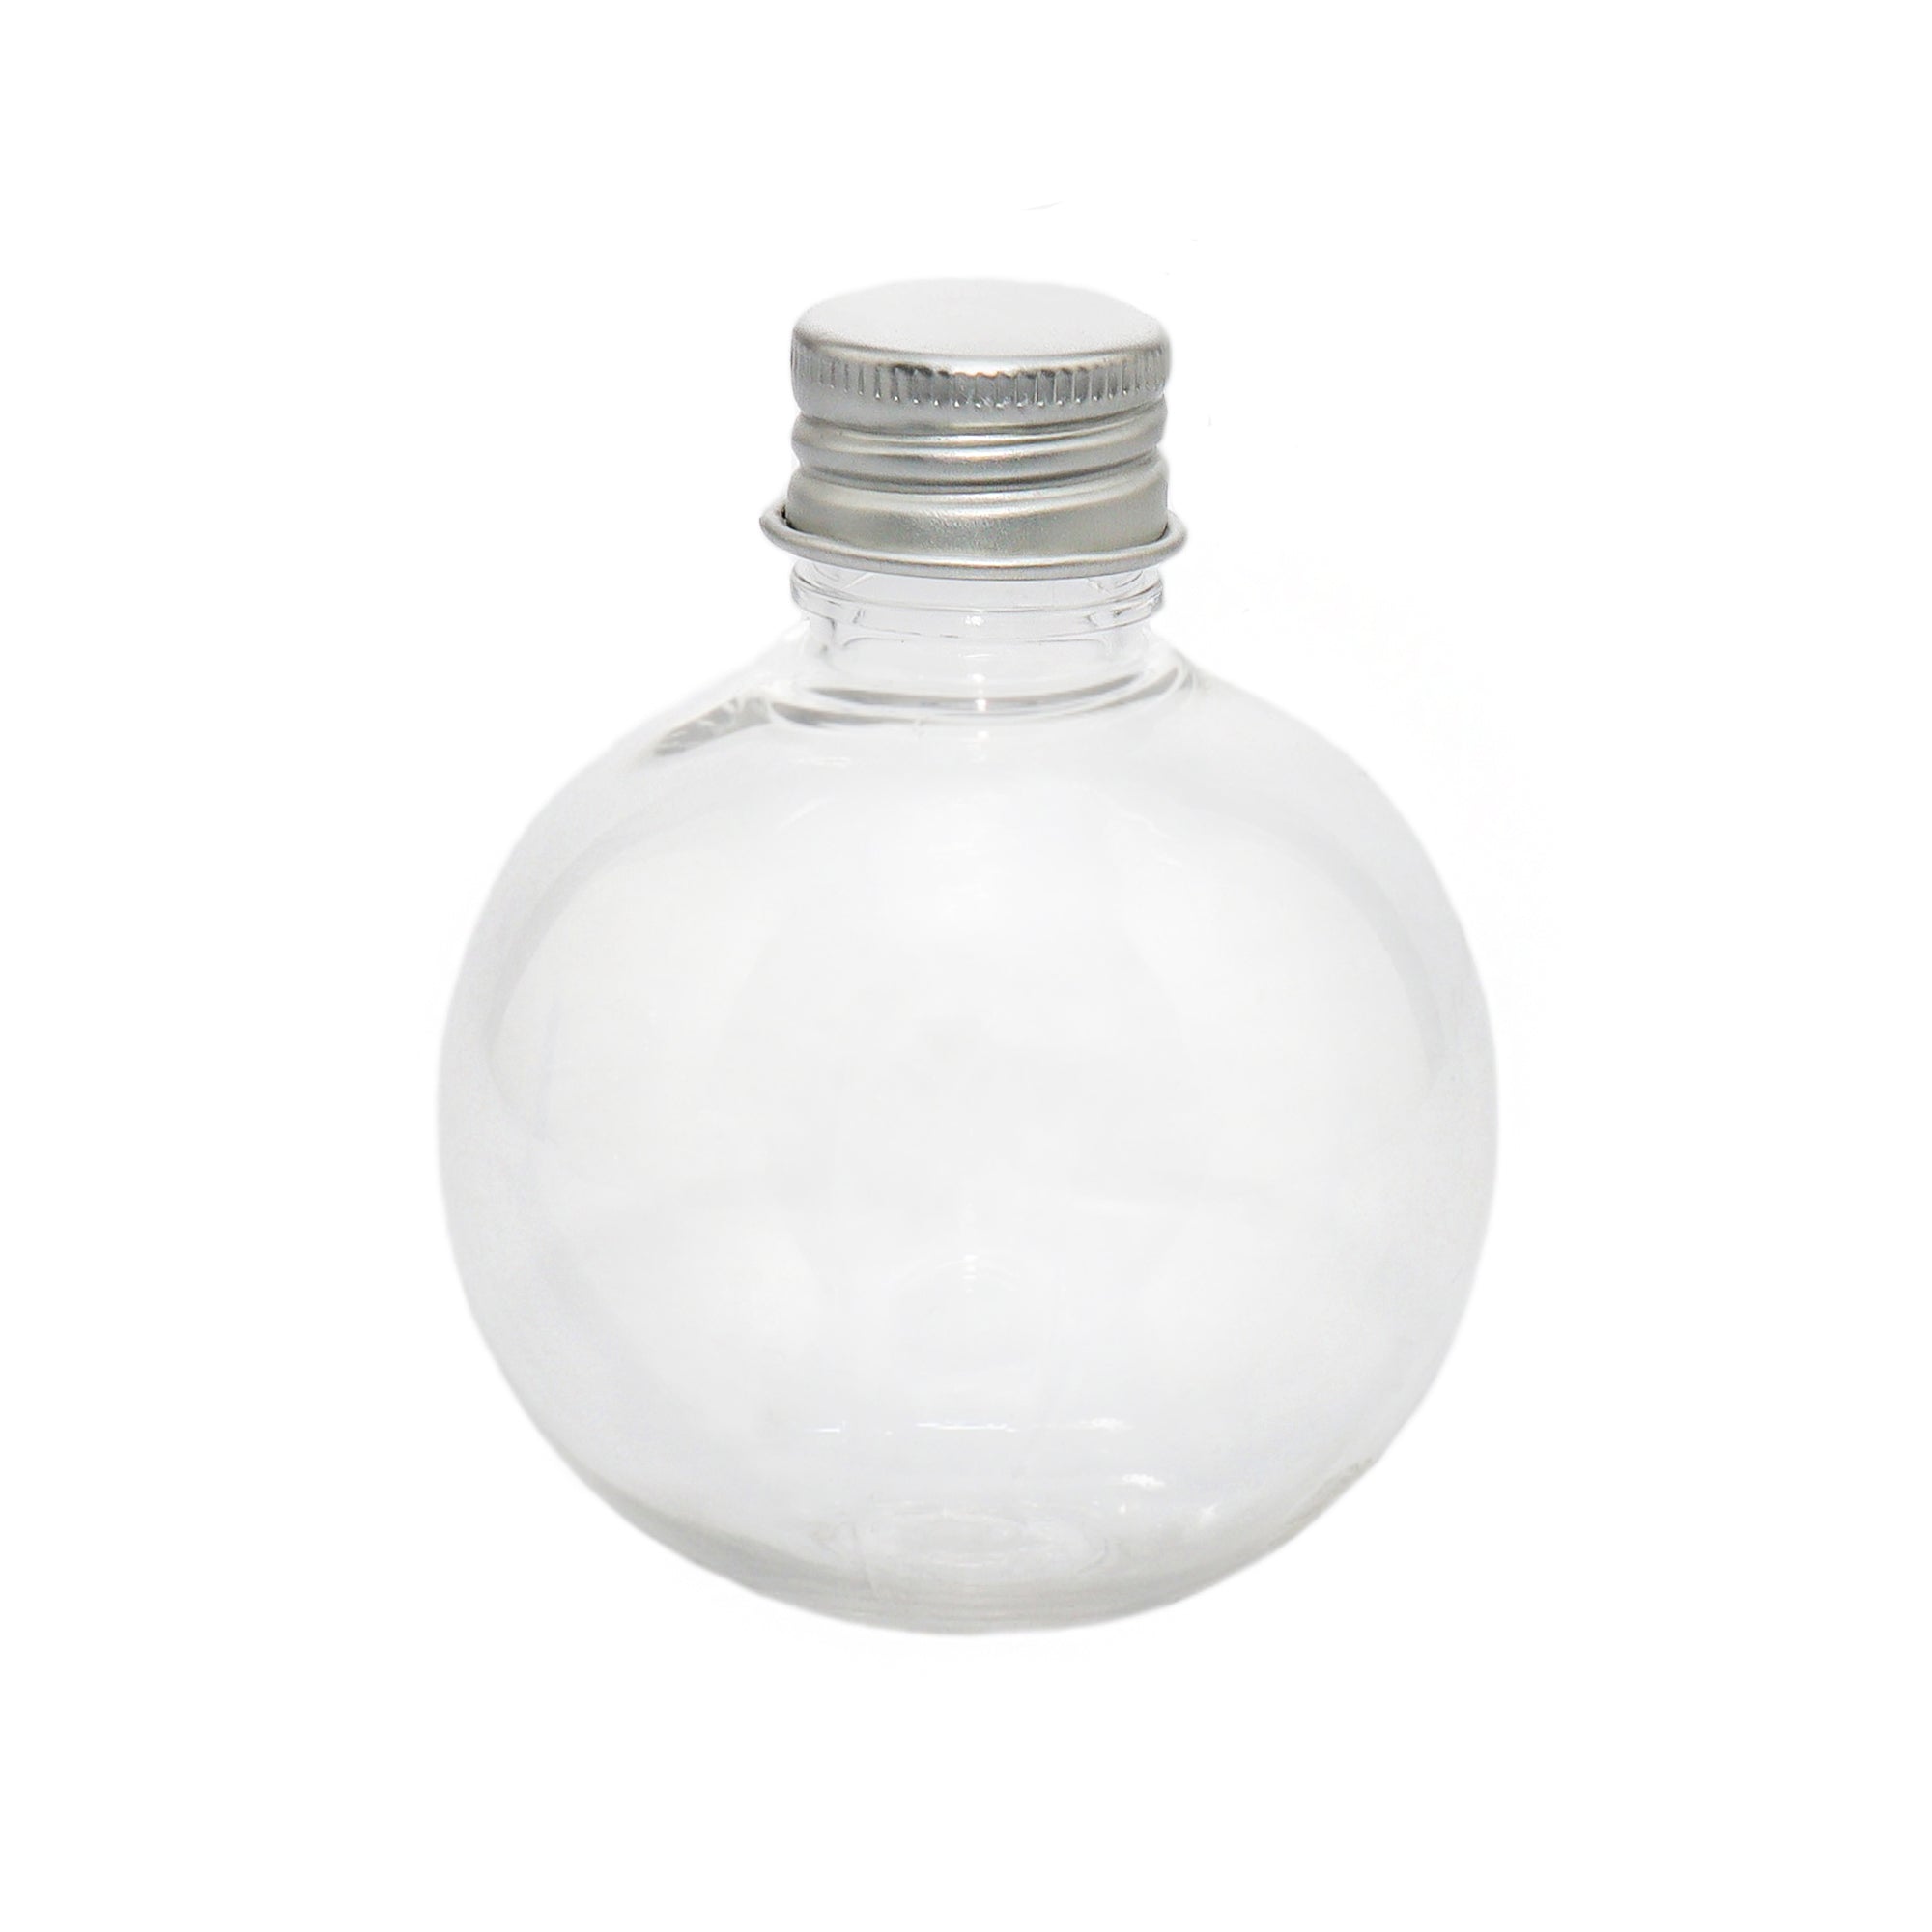 Plastic Globe Jar Spherical Ball Shaped Bottle with Silver Lid